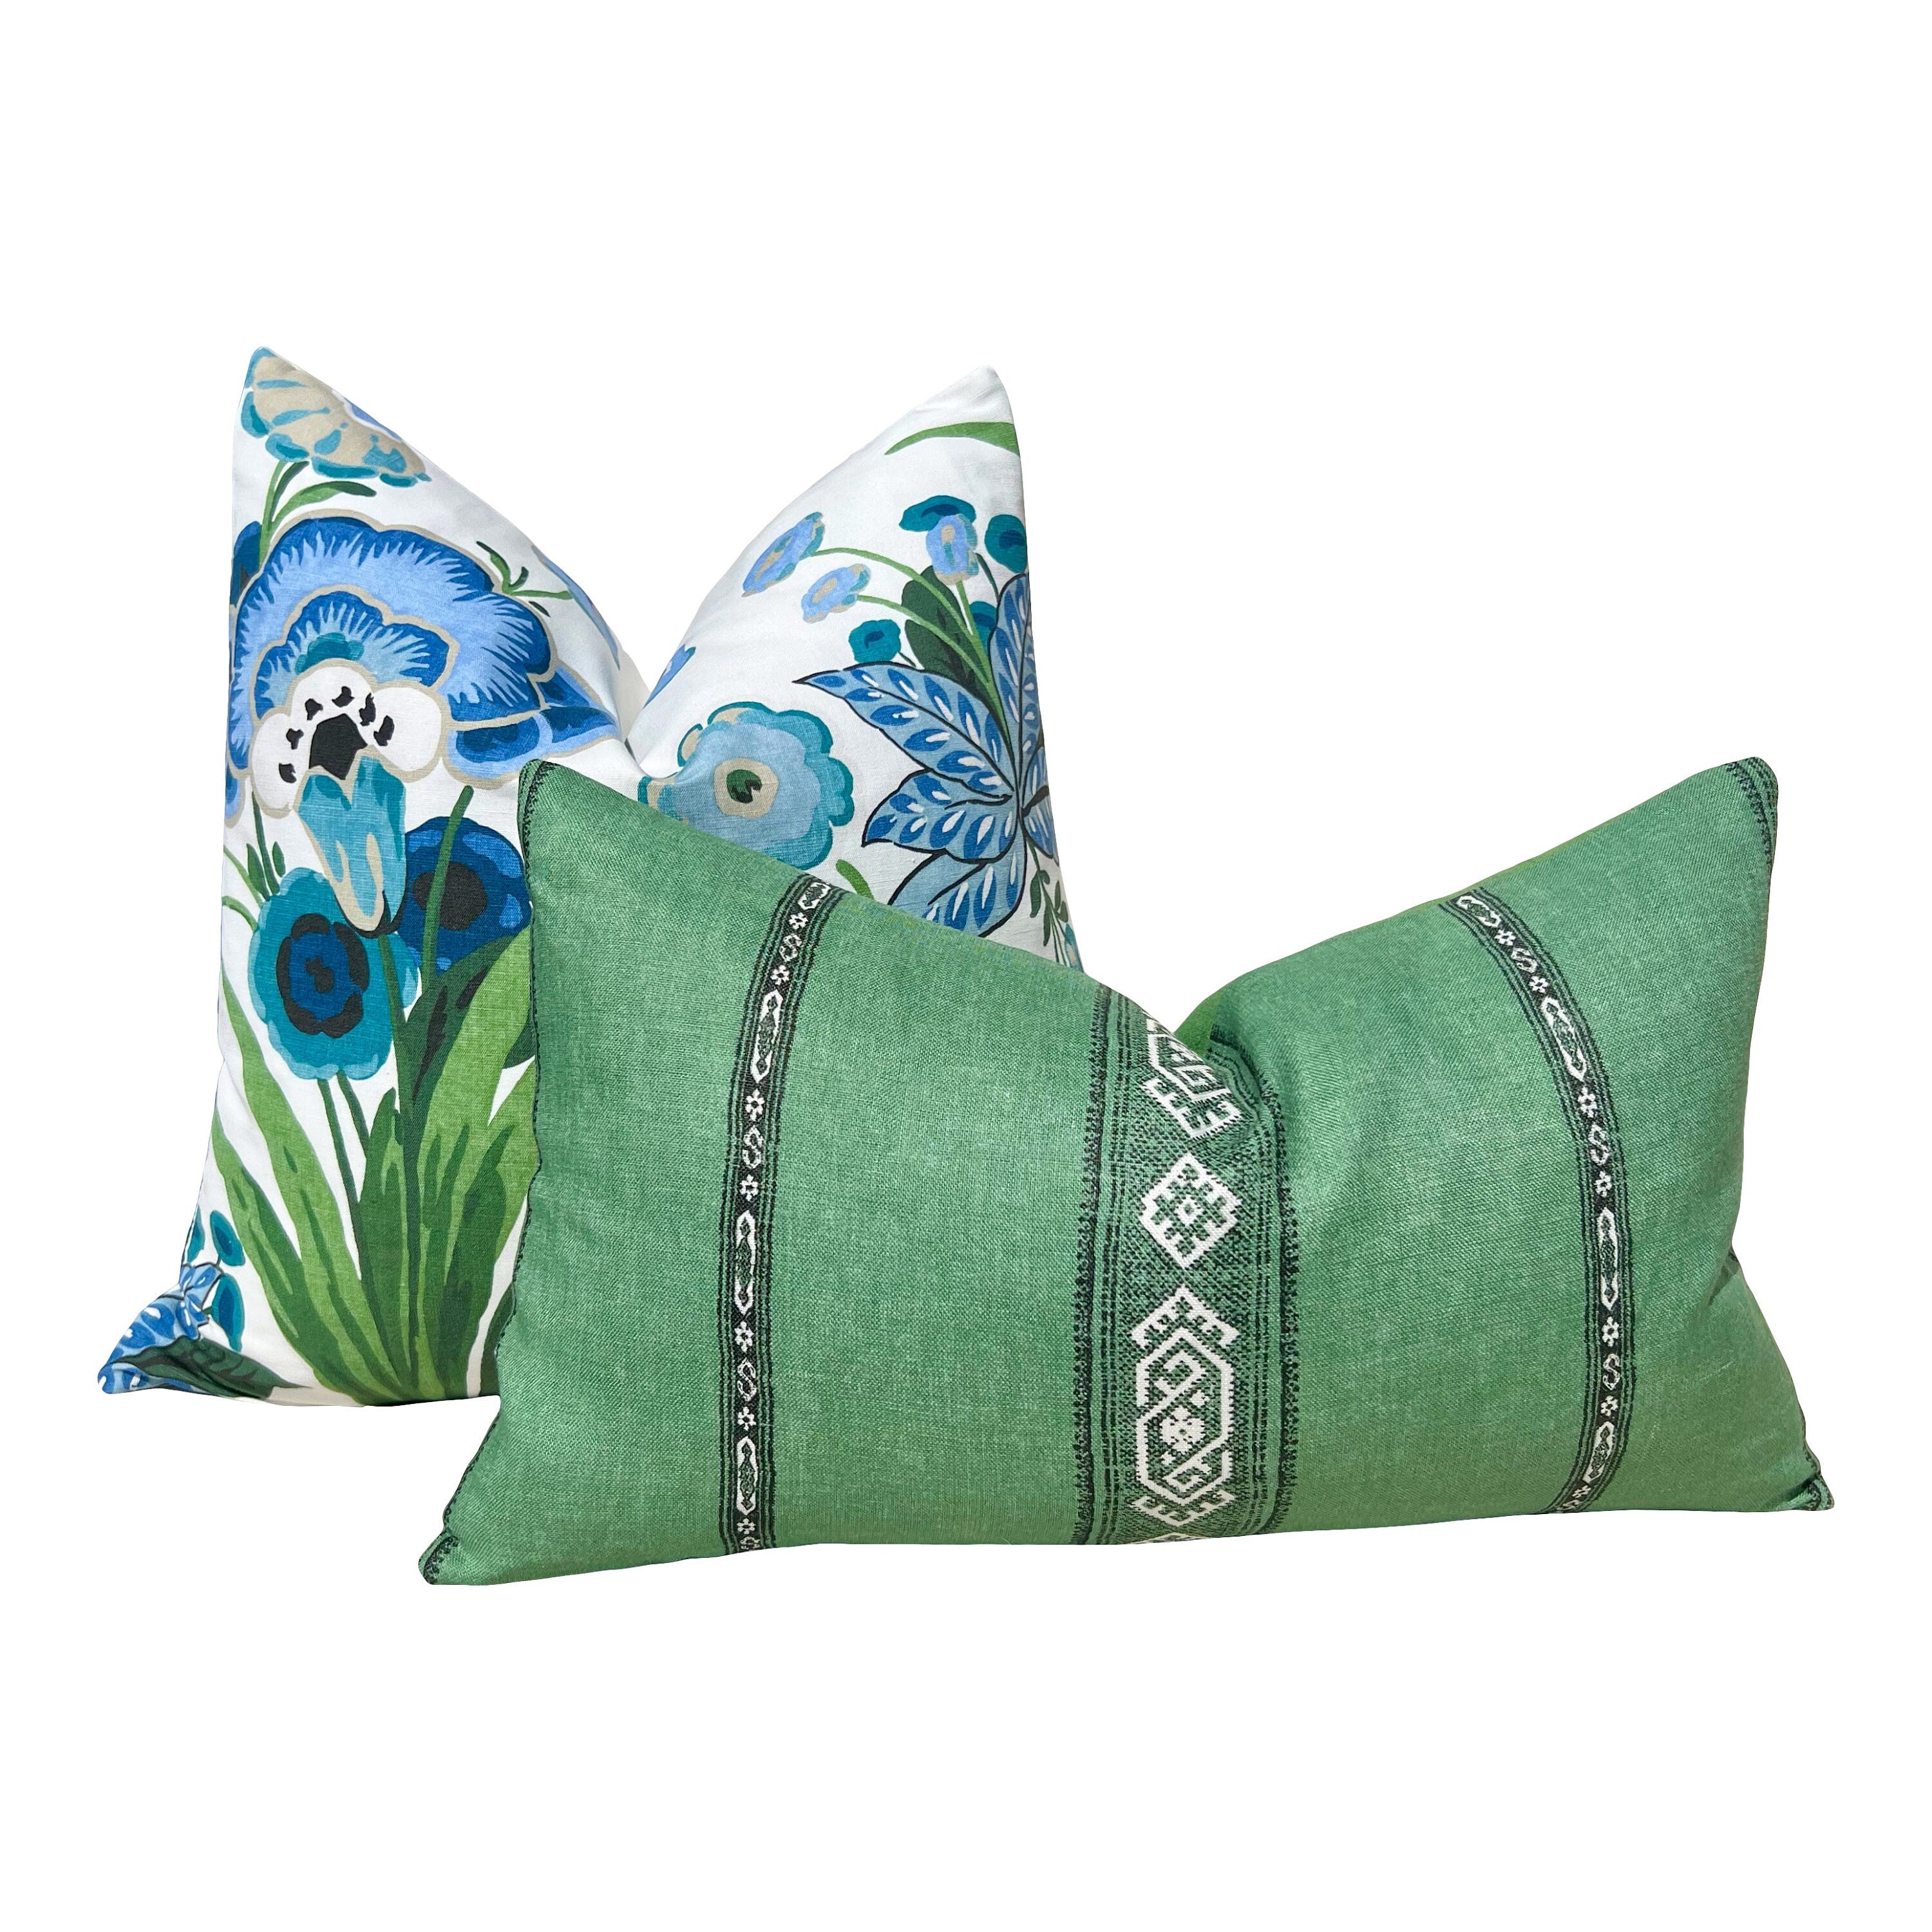 Floral Pasadena Pillow in Blue and Green. Decorative Accent Cushion Cover, Euro Sham Floral for Bed Sofa, Lumbar Pillow, Designer Pillows